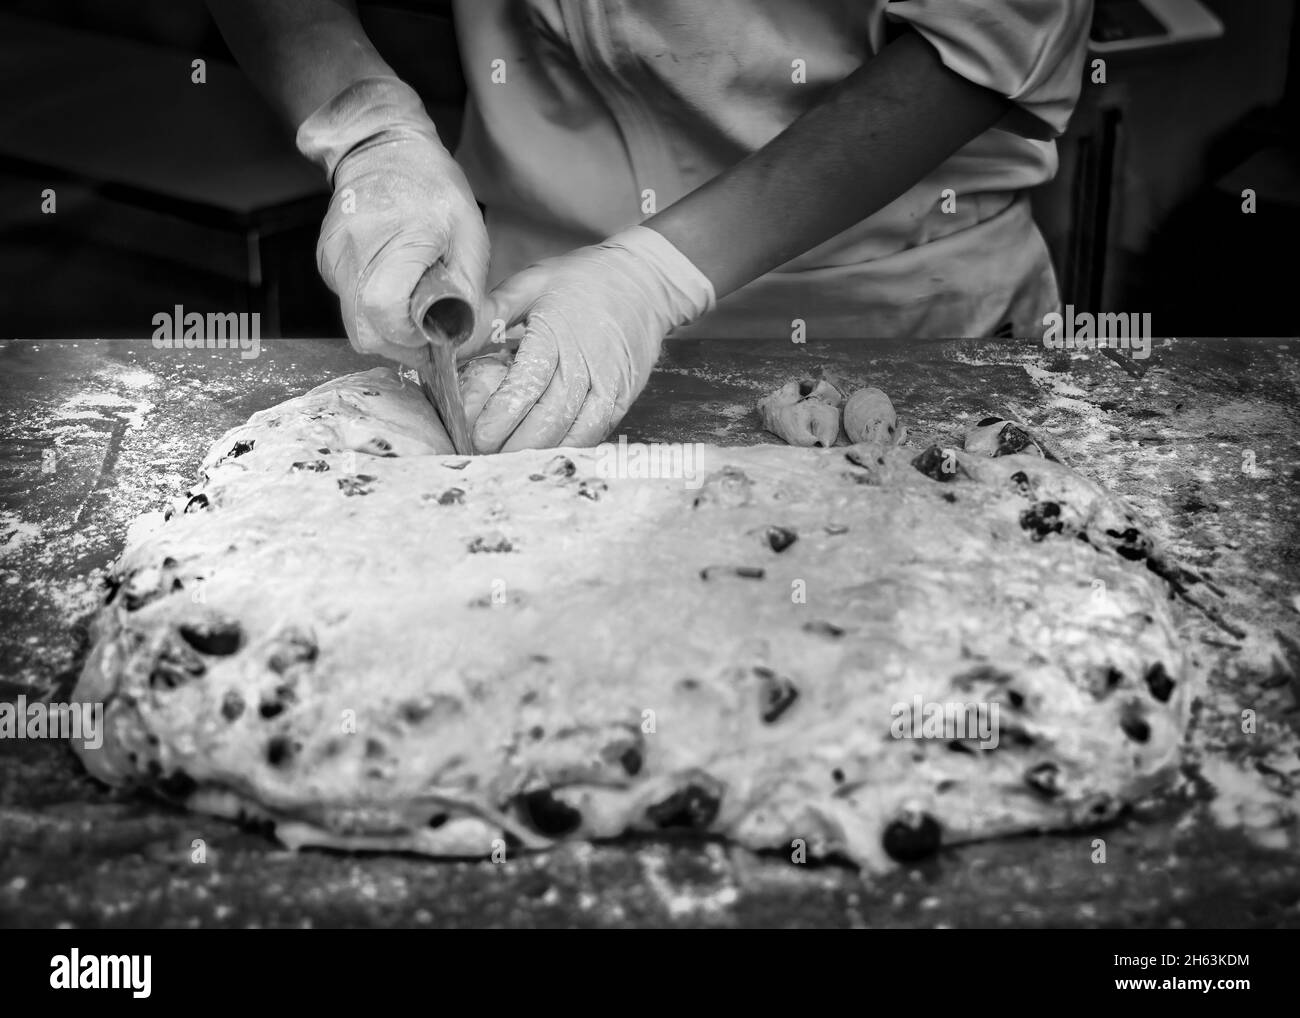 A baker cuts and dough on a table for chocolate chip cookies at a bakery in Hiroshima, Japan. Stock Photo